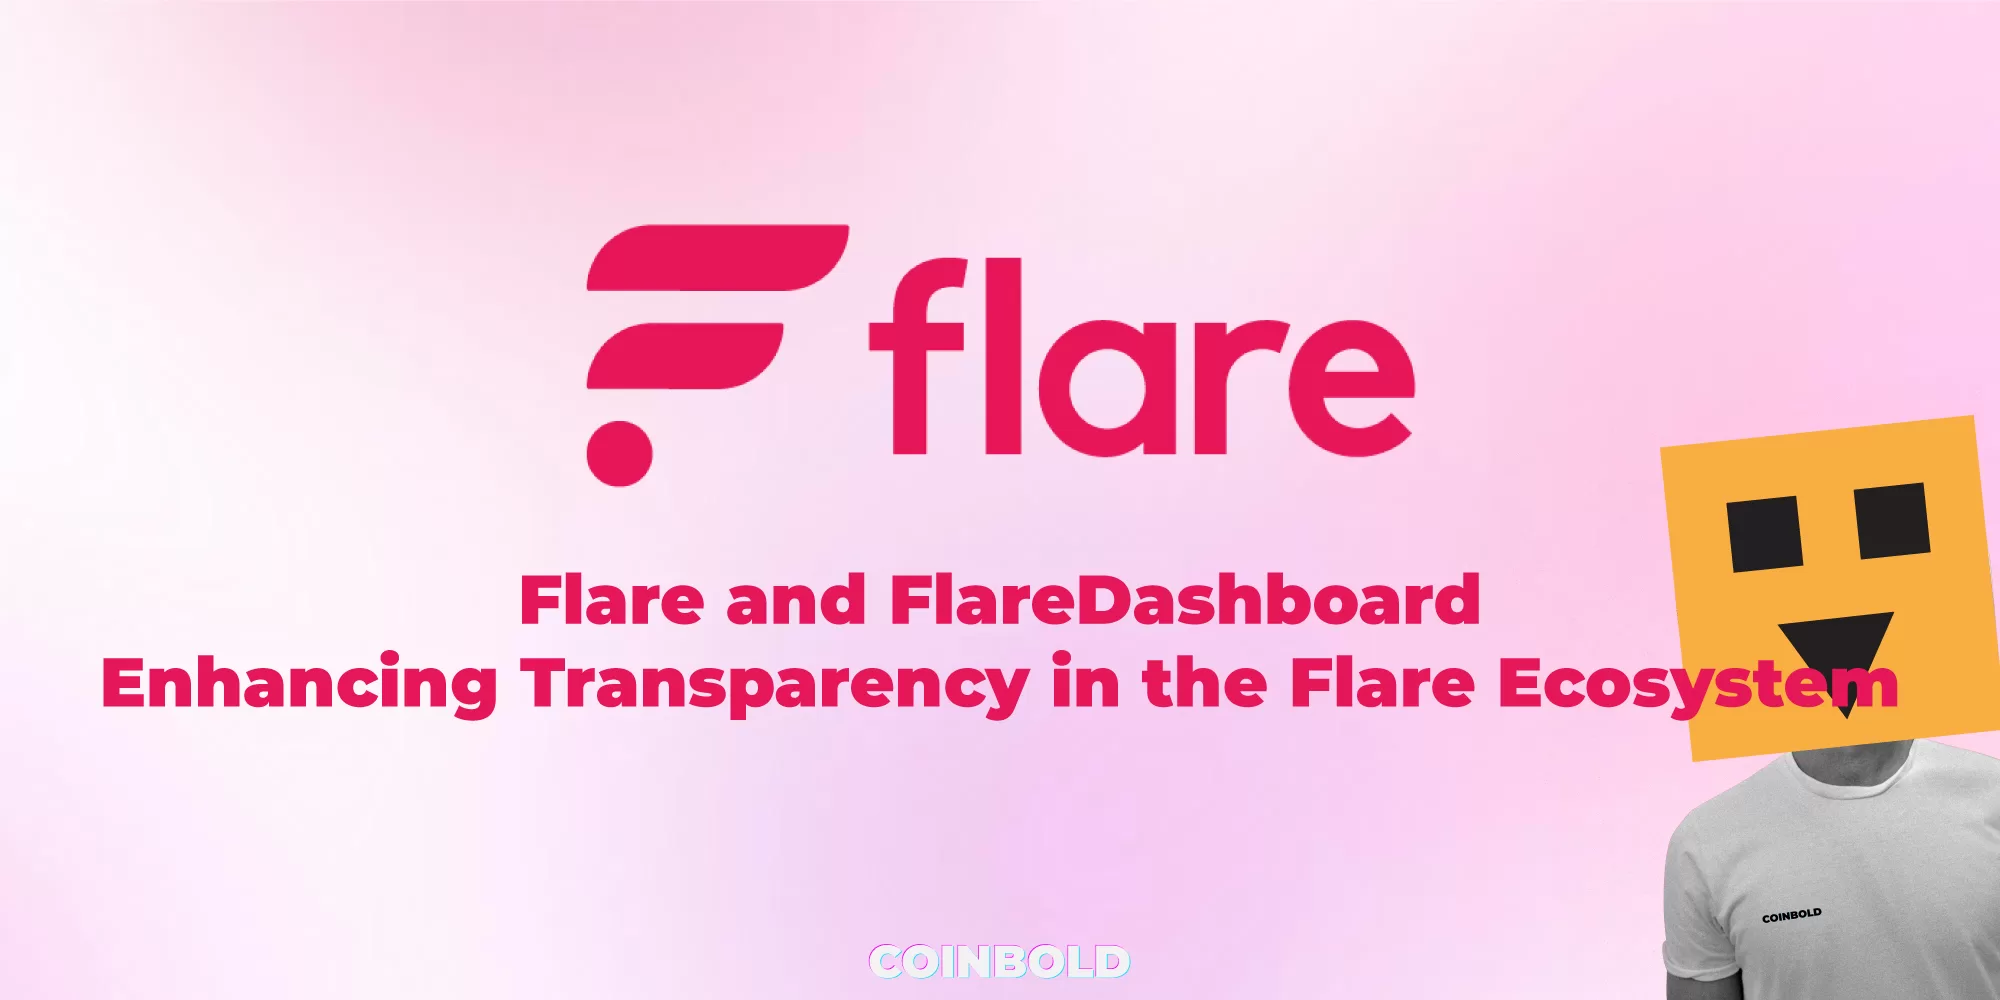 Flare and FlareDashboard: Enhancing Transparency in the Flare Ecosystem